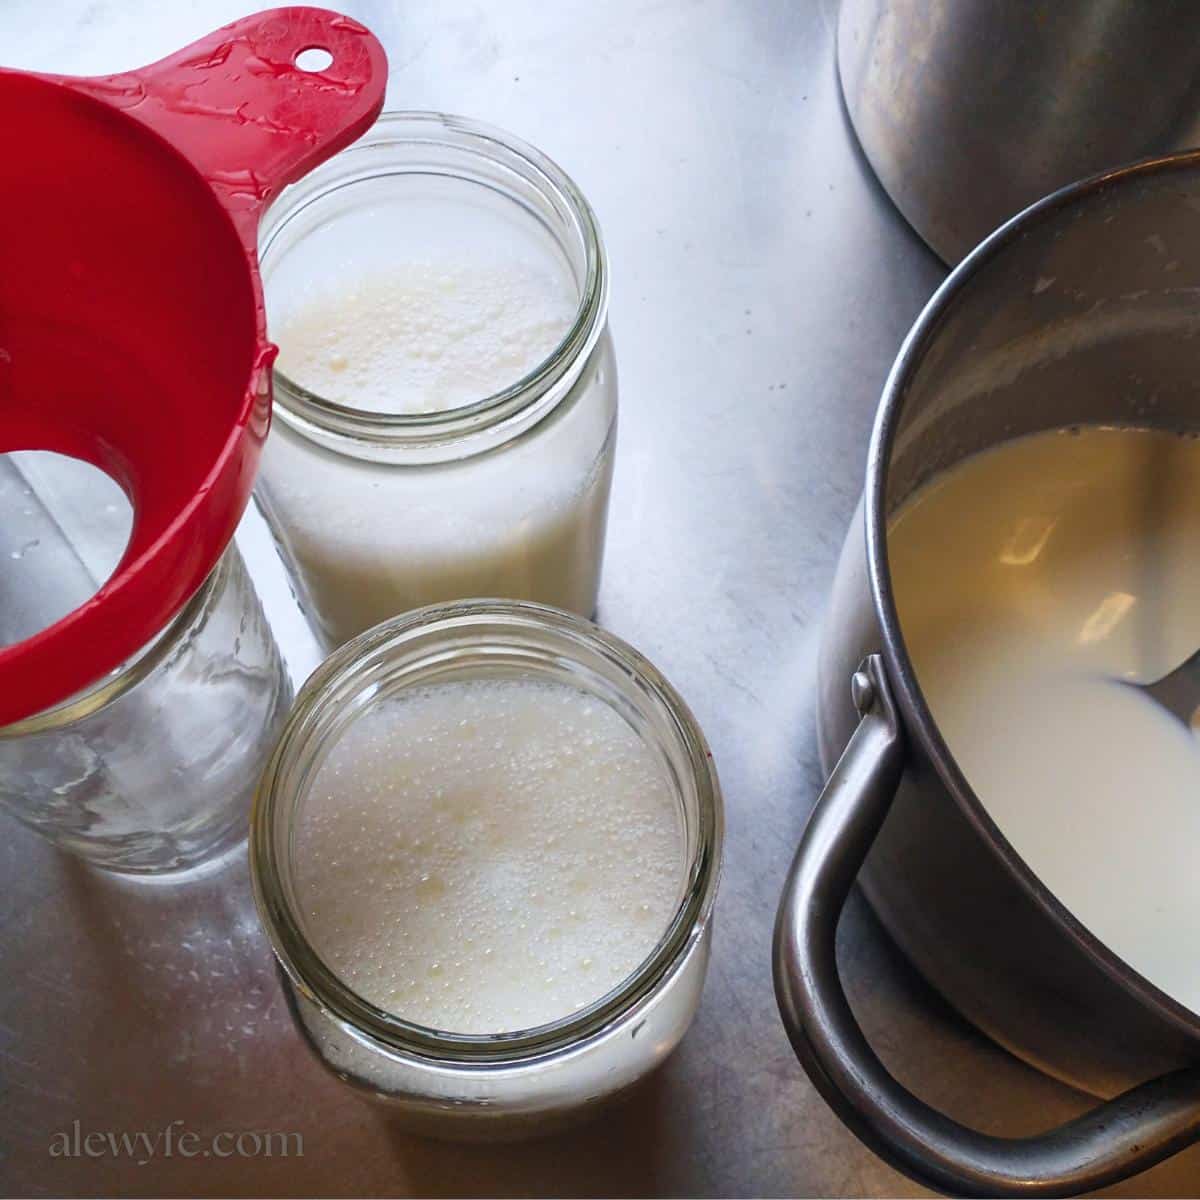 a pot of milk and mason jars filled with milk and yogurt cultures, ready to incubate and make homemade yogurt.